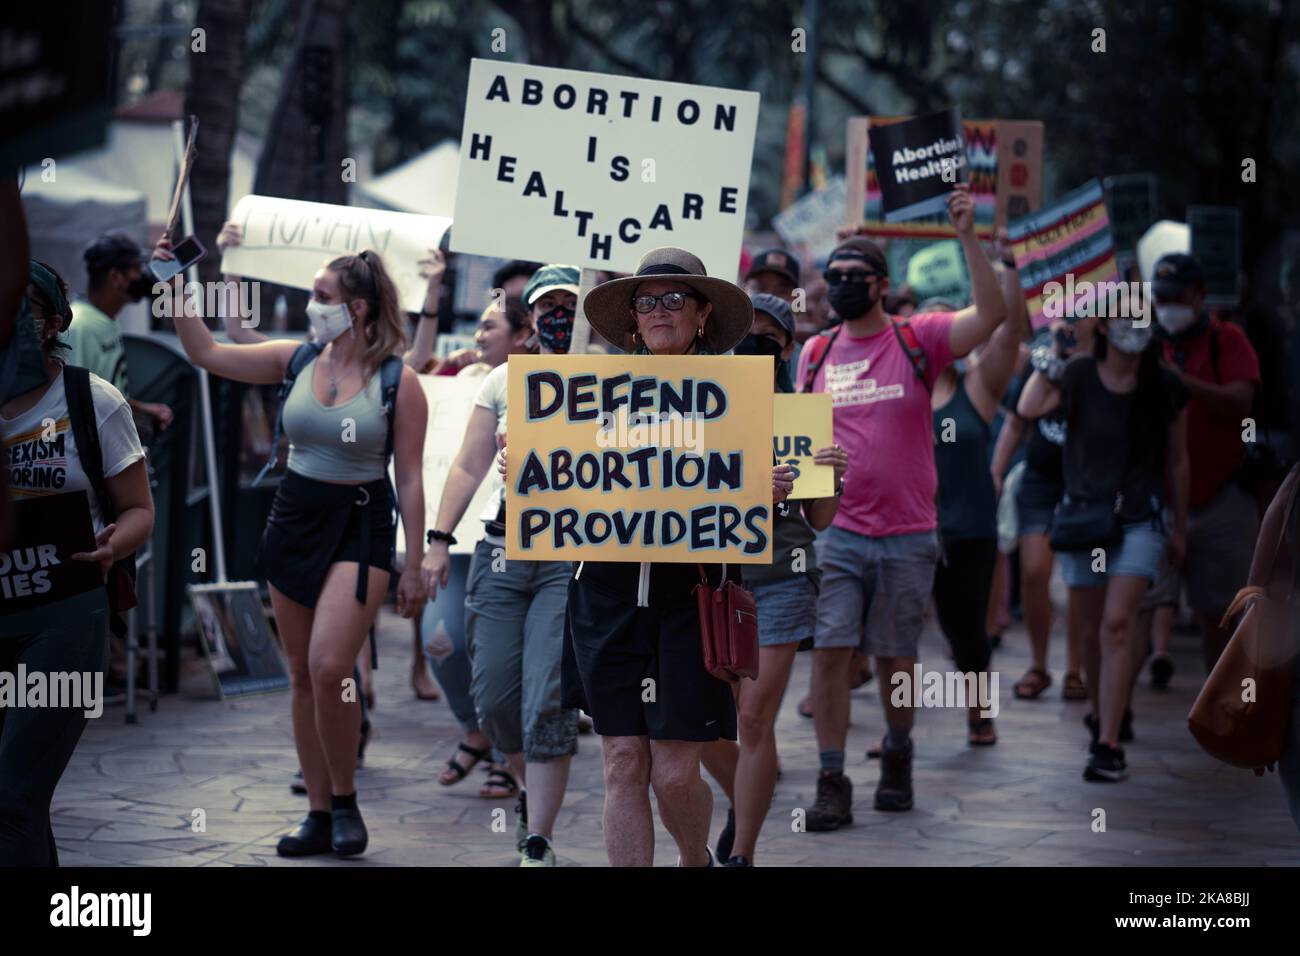 A female with a poster of 'Defend Abortion Providers' - Human Rights Rally at Waikiki Stock Photo